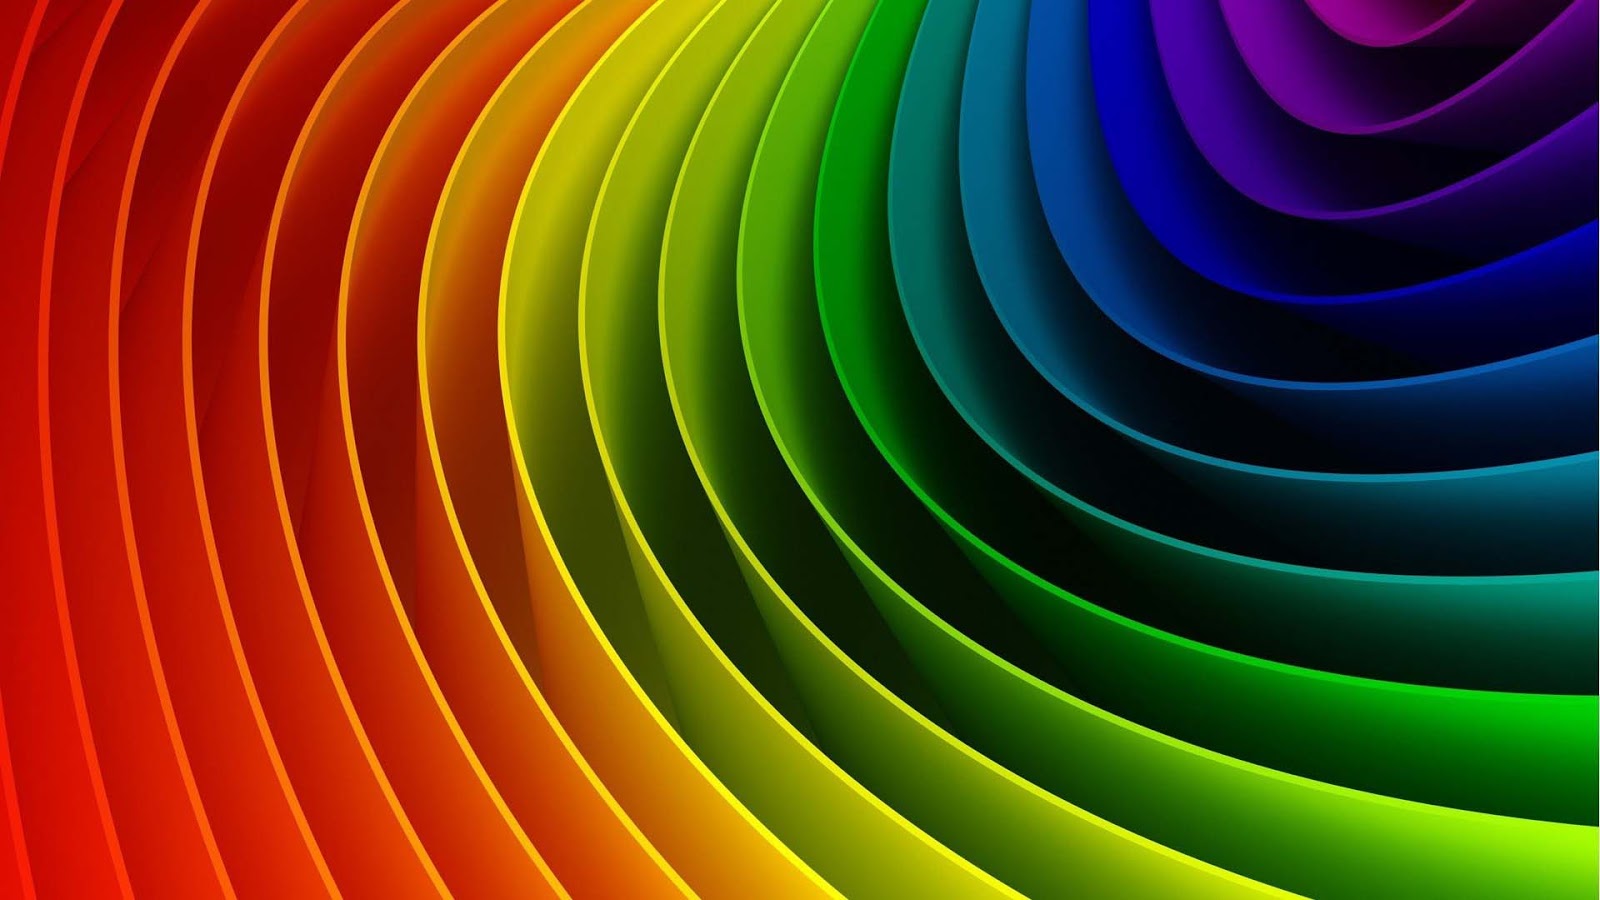 Background Abstract Rainbow Background Desktop Car Pictures